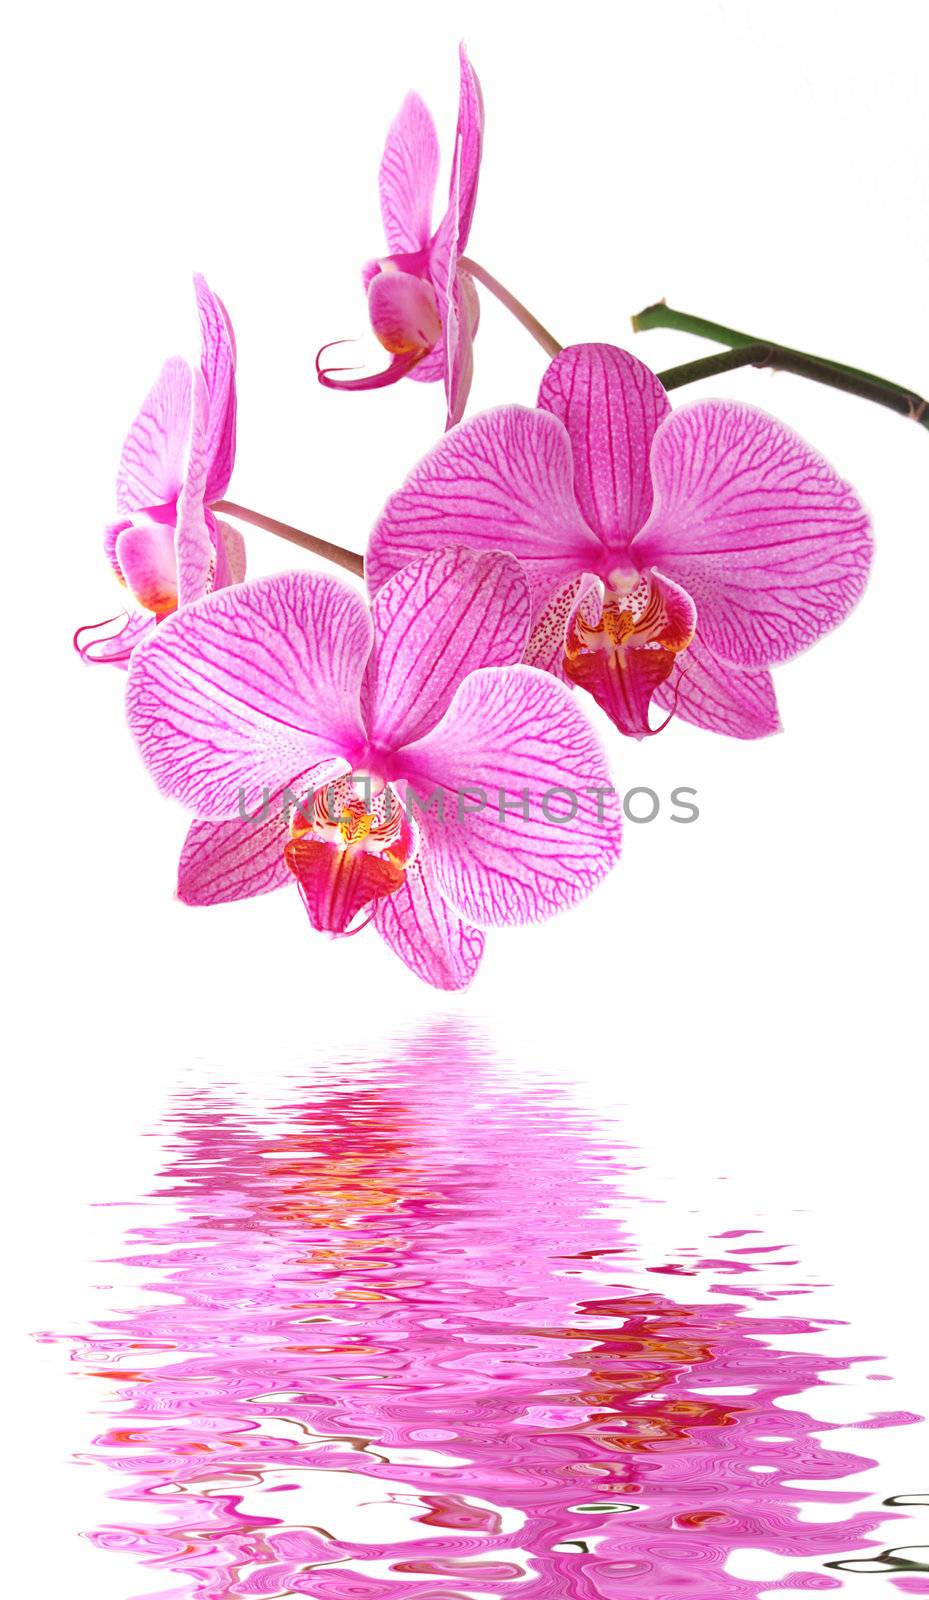 Pink orchid reflection by fyletto